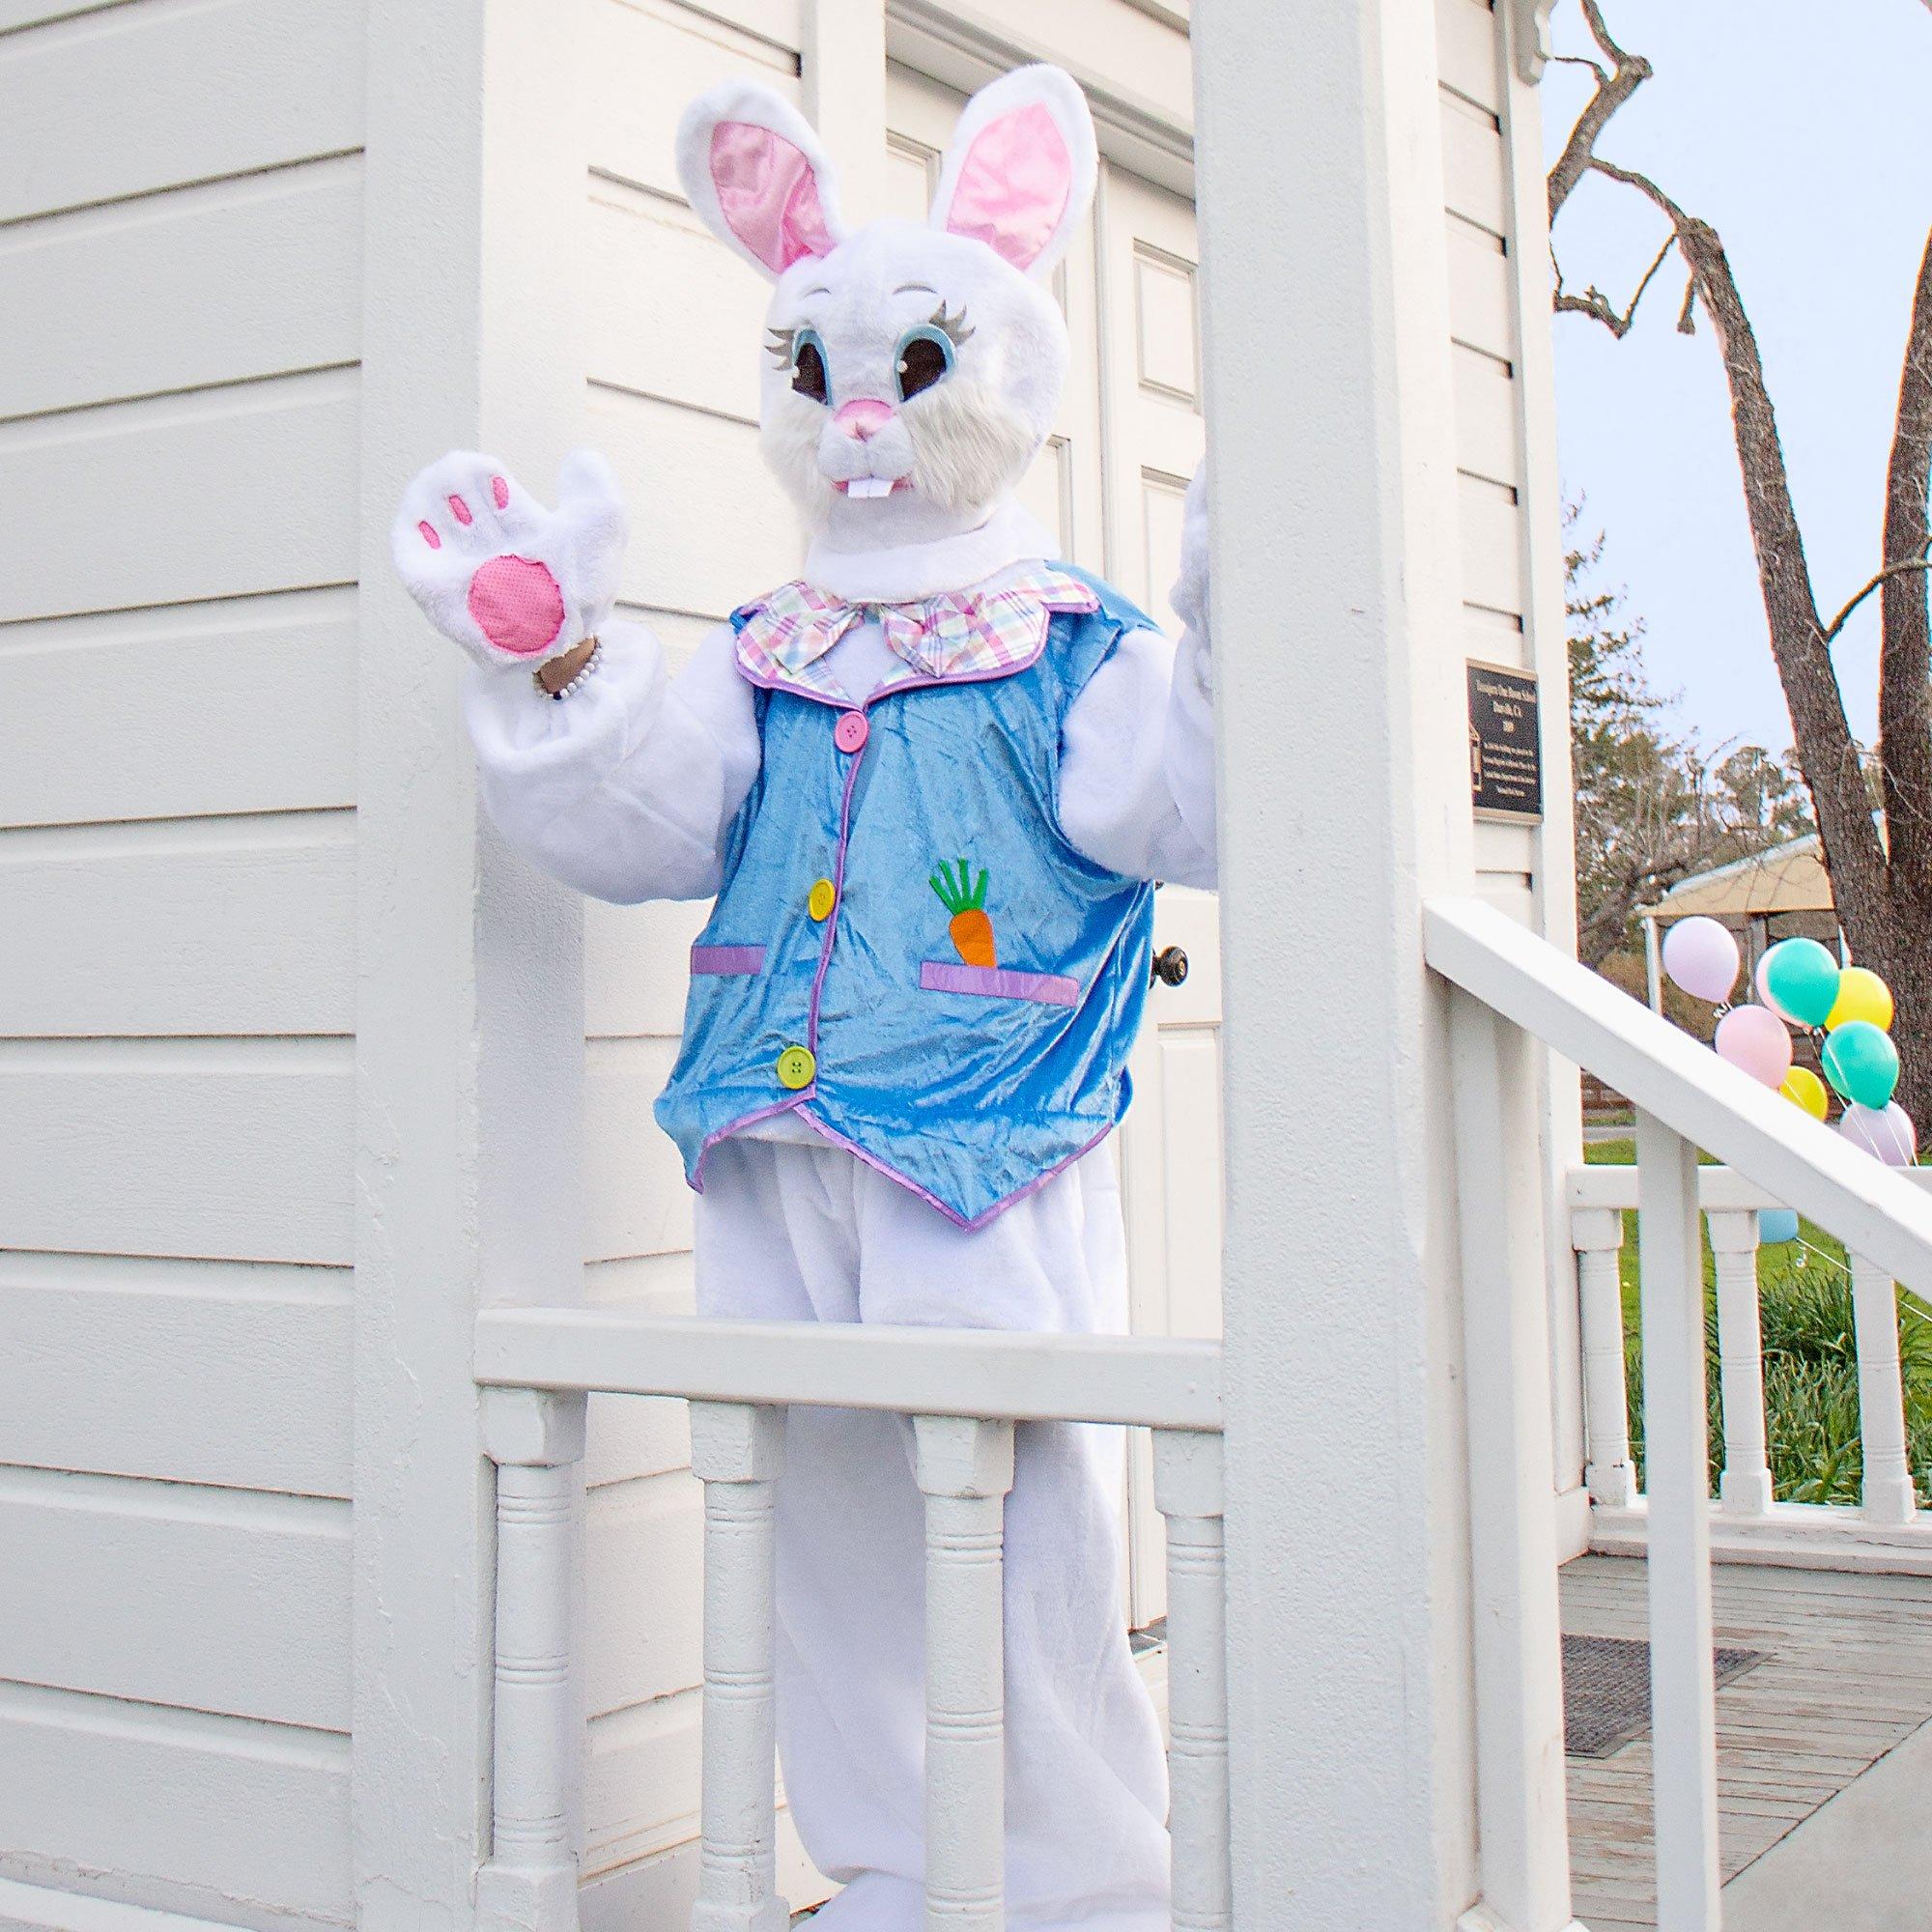 Adult Deluxe Easter Bunny Costume with Headpiece